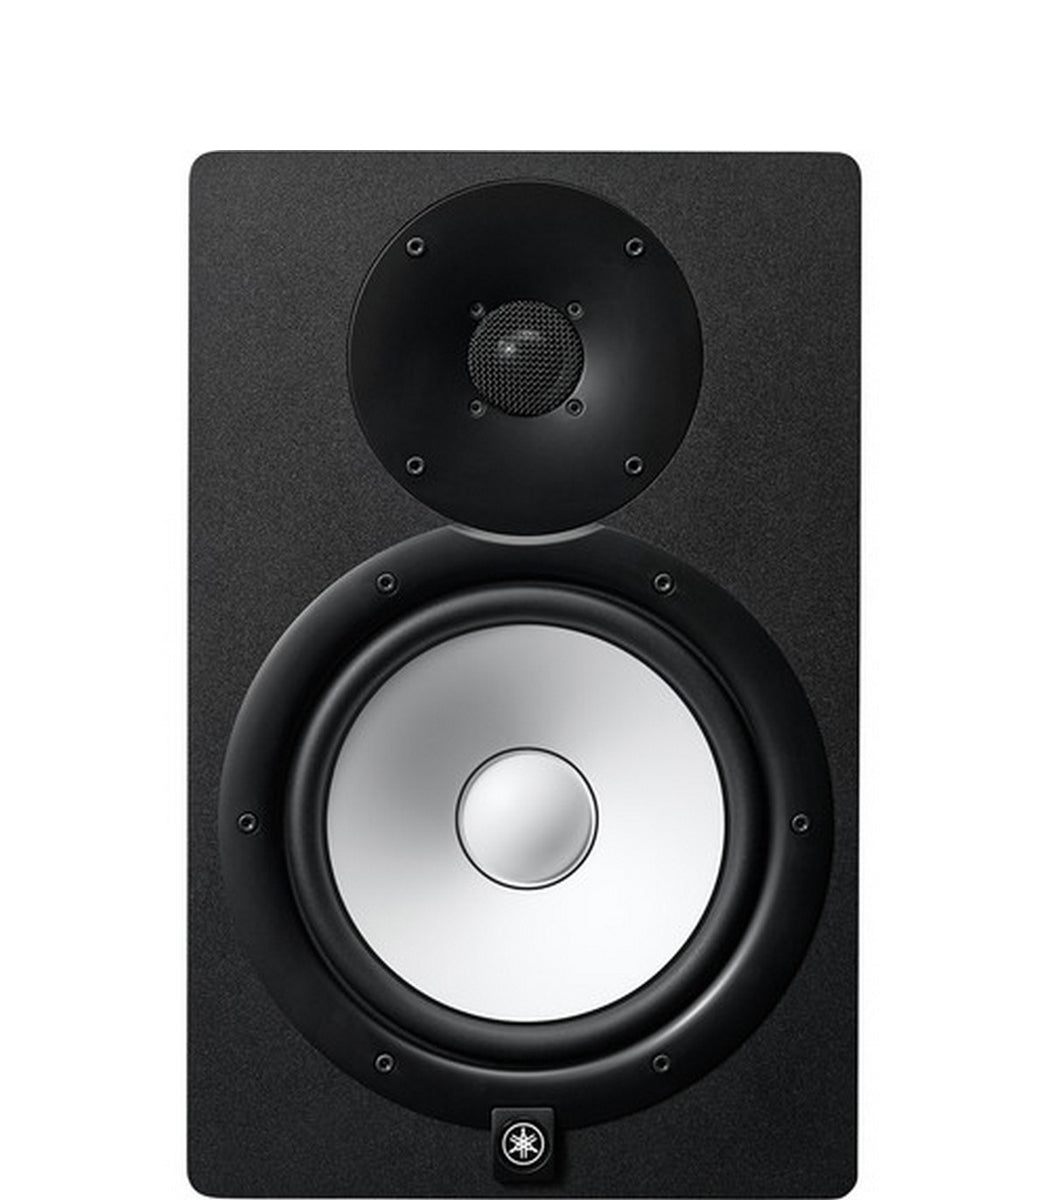 Yamaha HS8 120W Active Studio Monitor with 8" Cone Woofer 1" Dome Tweeter and Room-control and High Trim Response Controls